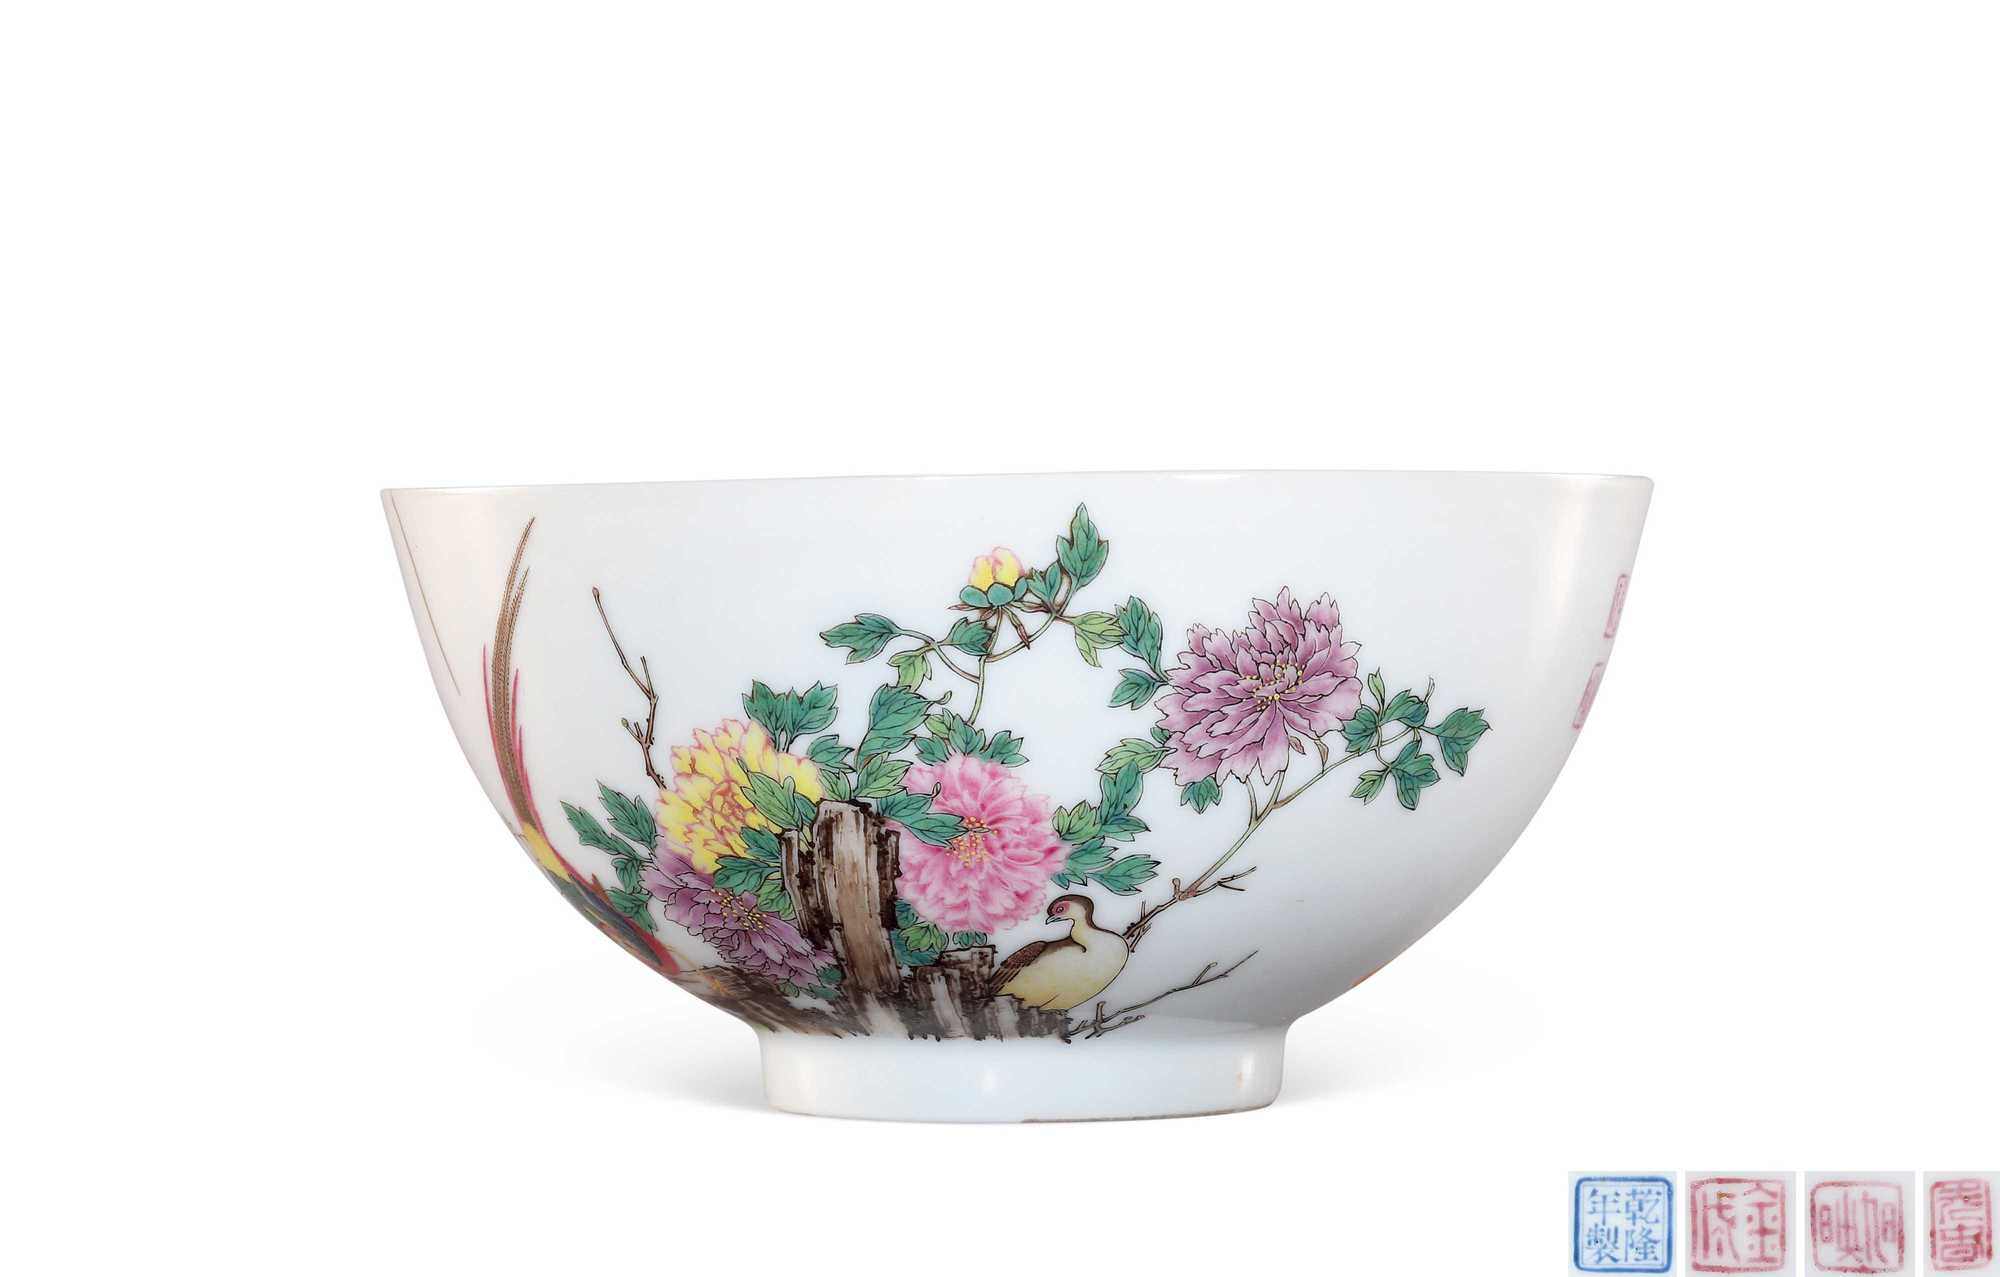 AN IMPORTANT AND RARE FALANGCAI‘POEM AND FLORAL’BOWL